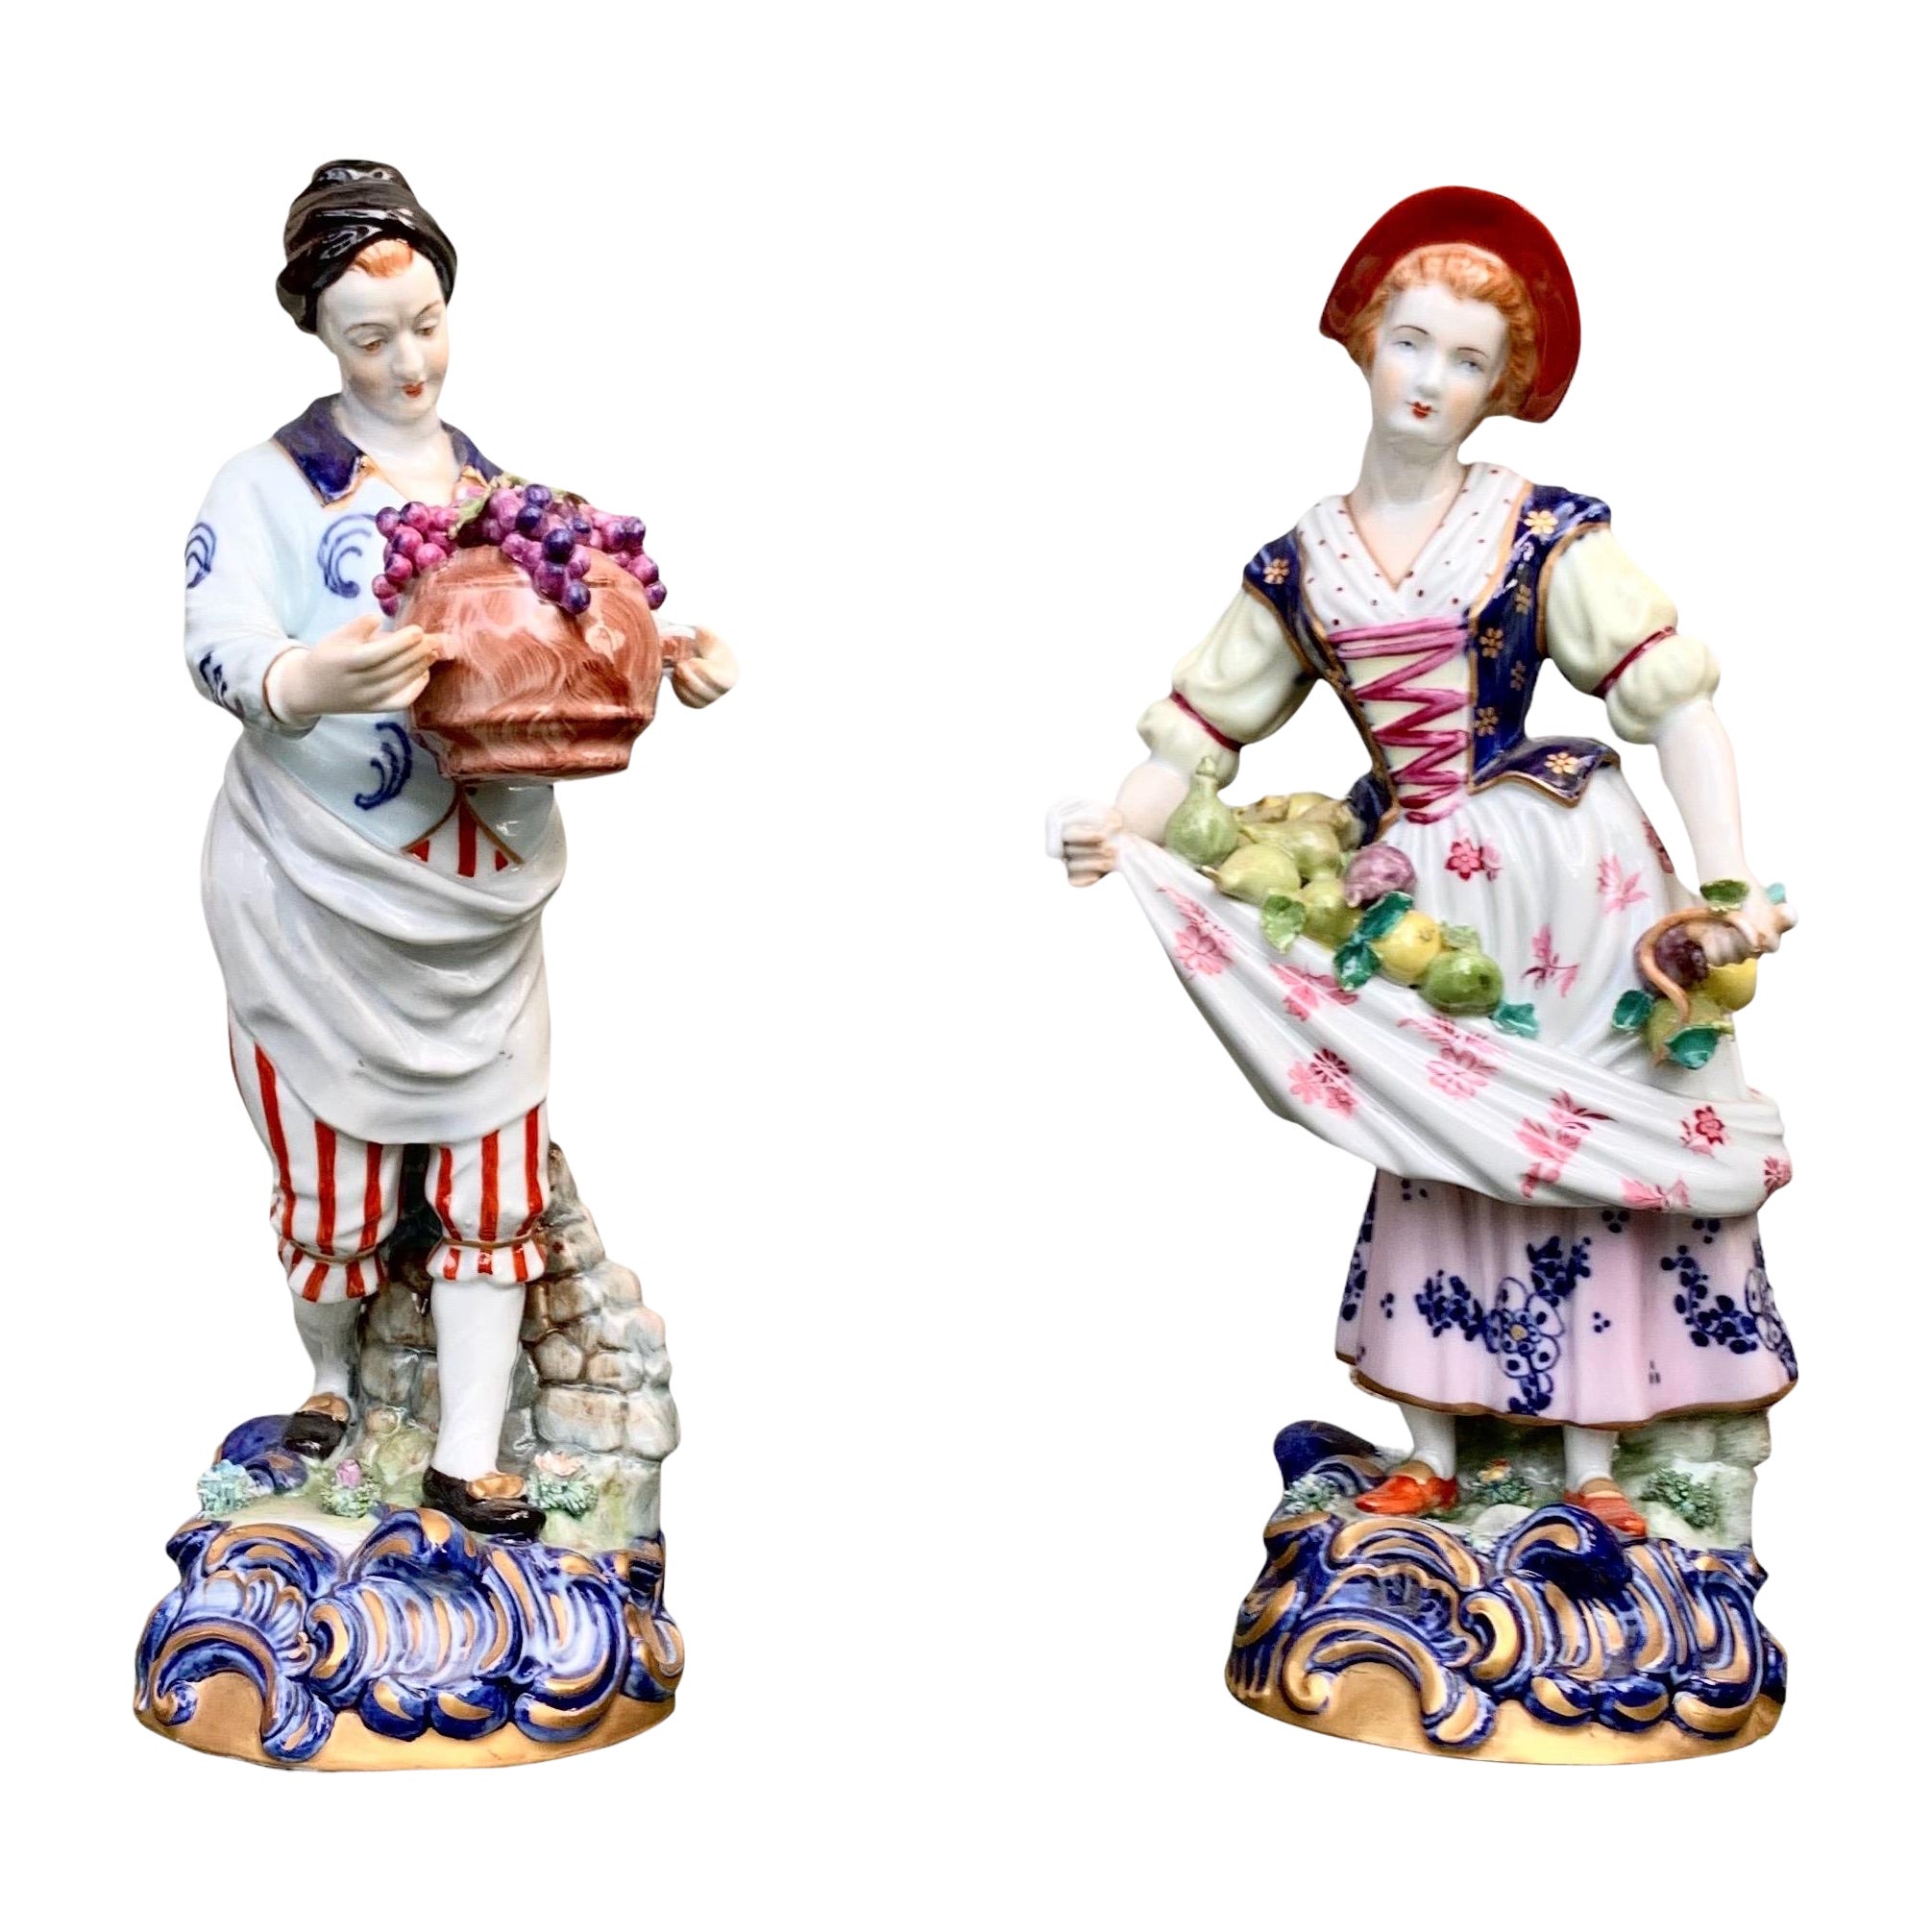 Pair of Early 19th C. Sevres Porcelain Figures For Sale